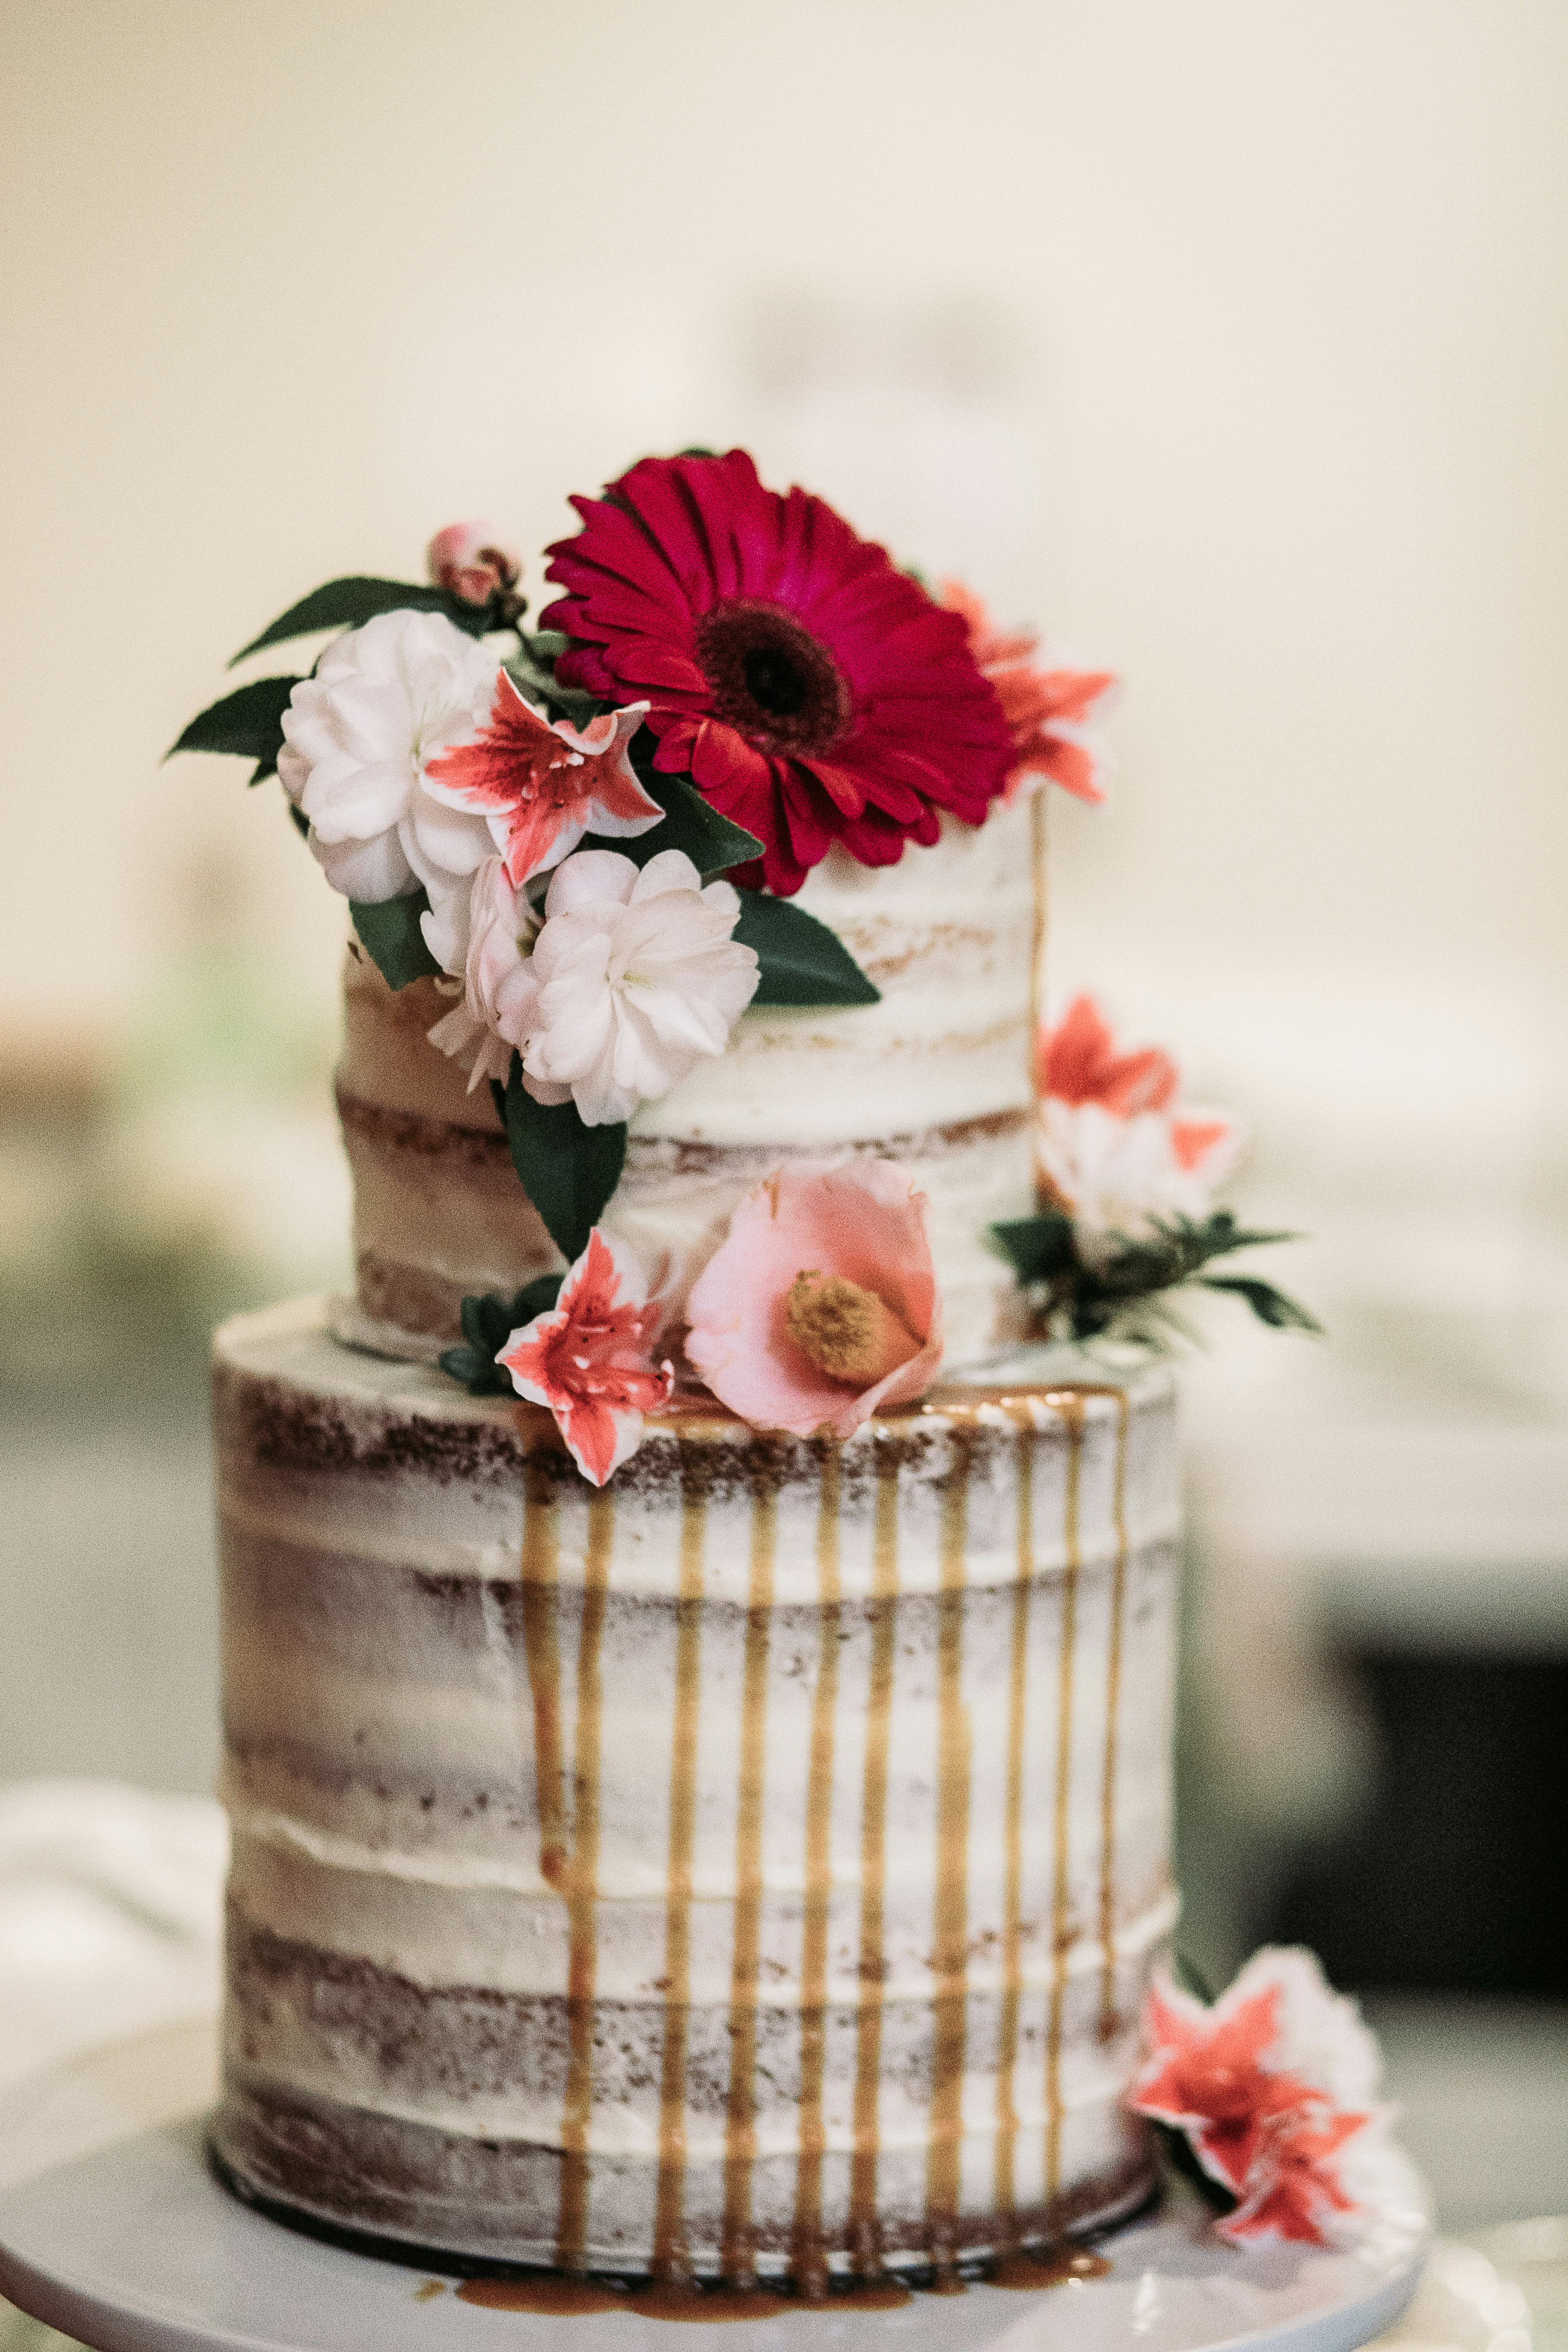 white icing-covered cake with flowers on top